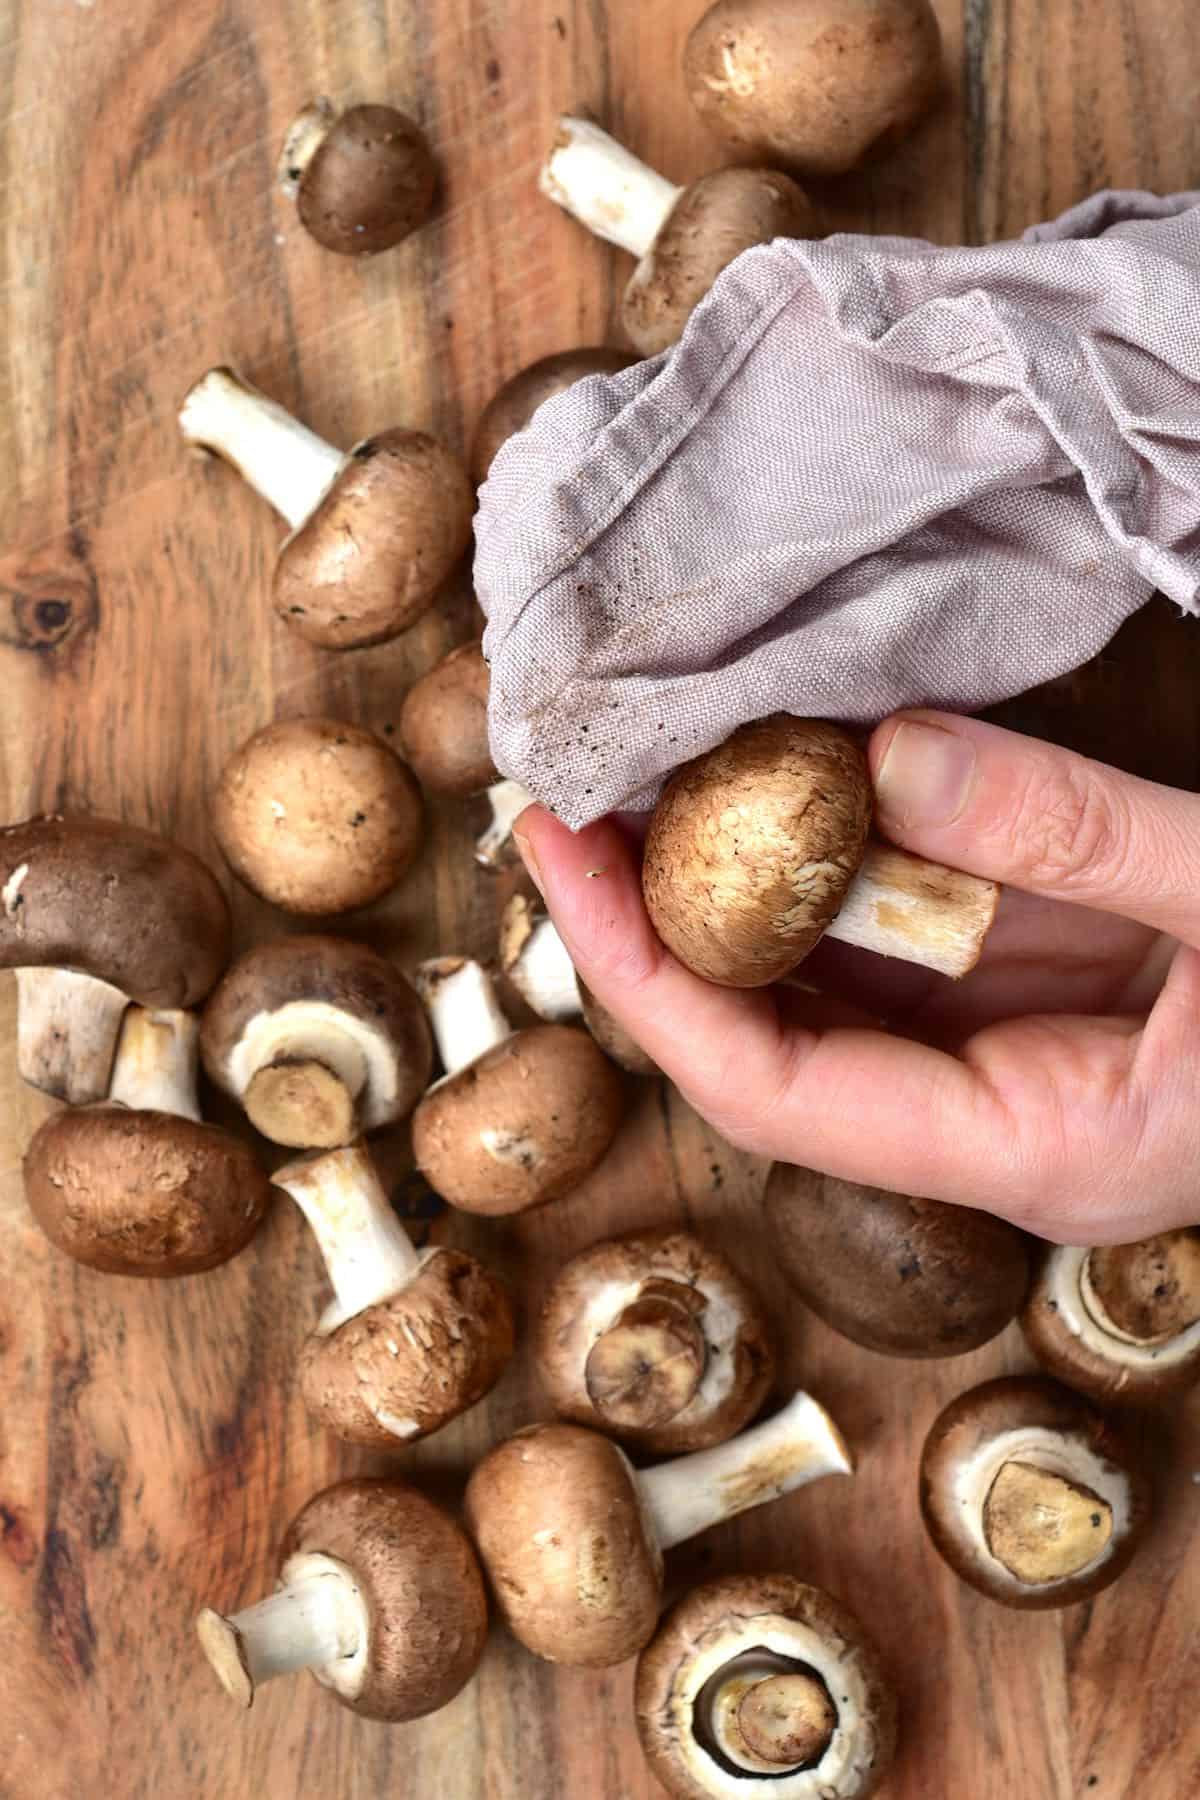 Cleaning mushrooms with a kitchen towel